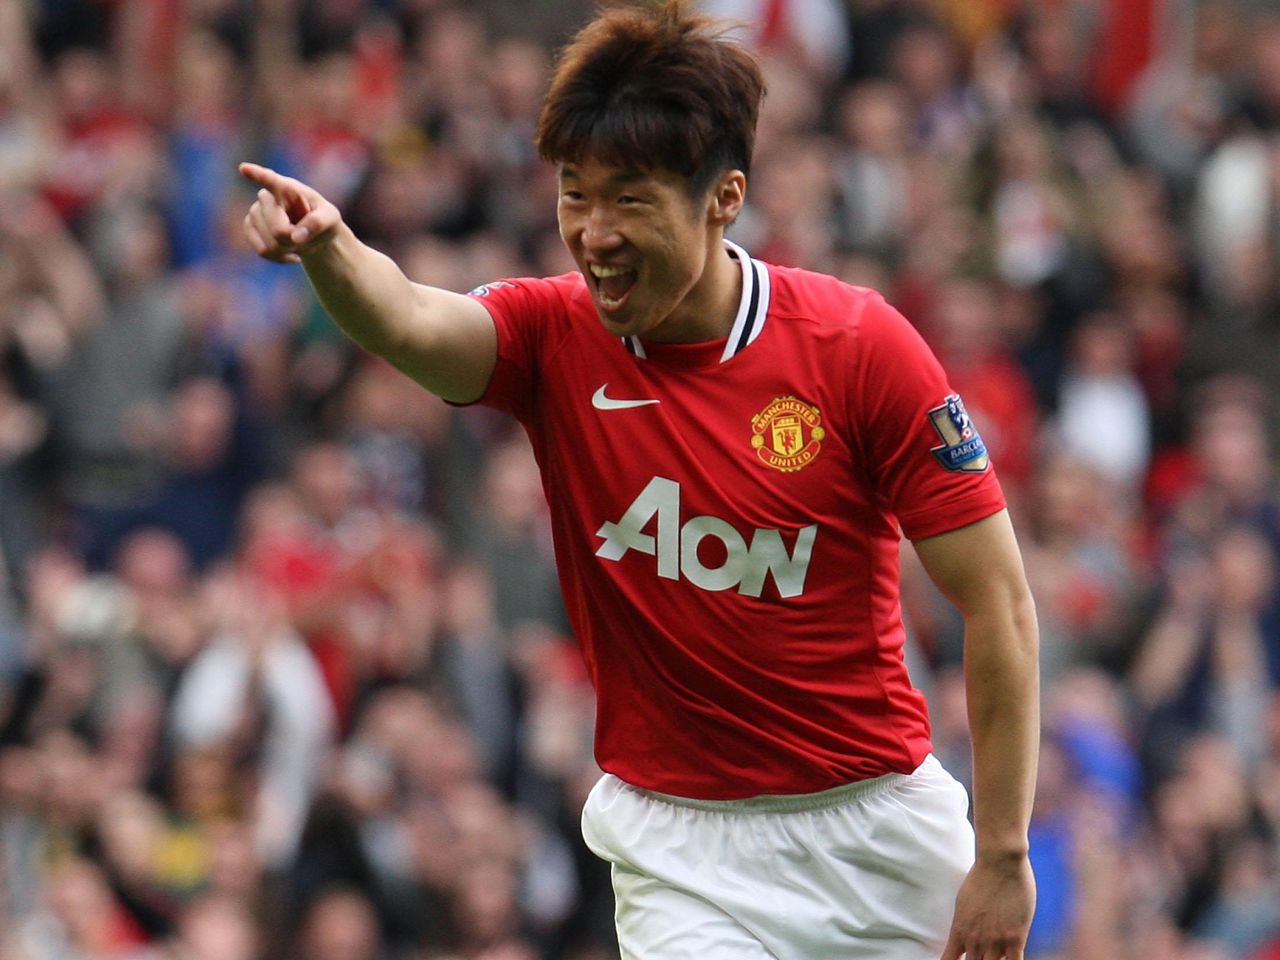 Wayne Rooney says Park Ji-Sung was 'just as important as Cristiano